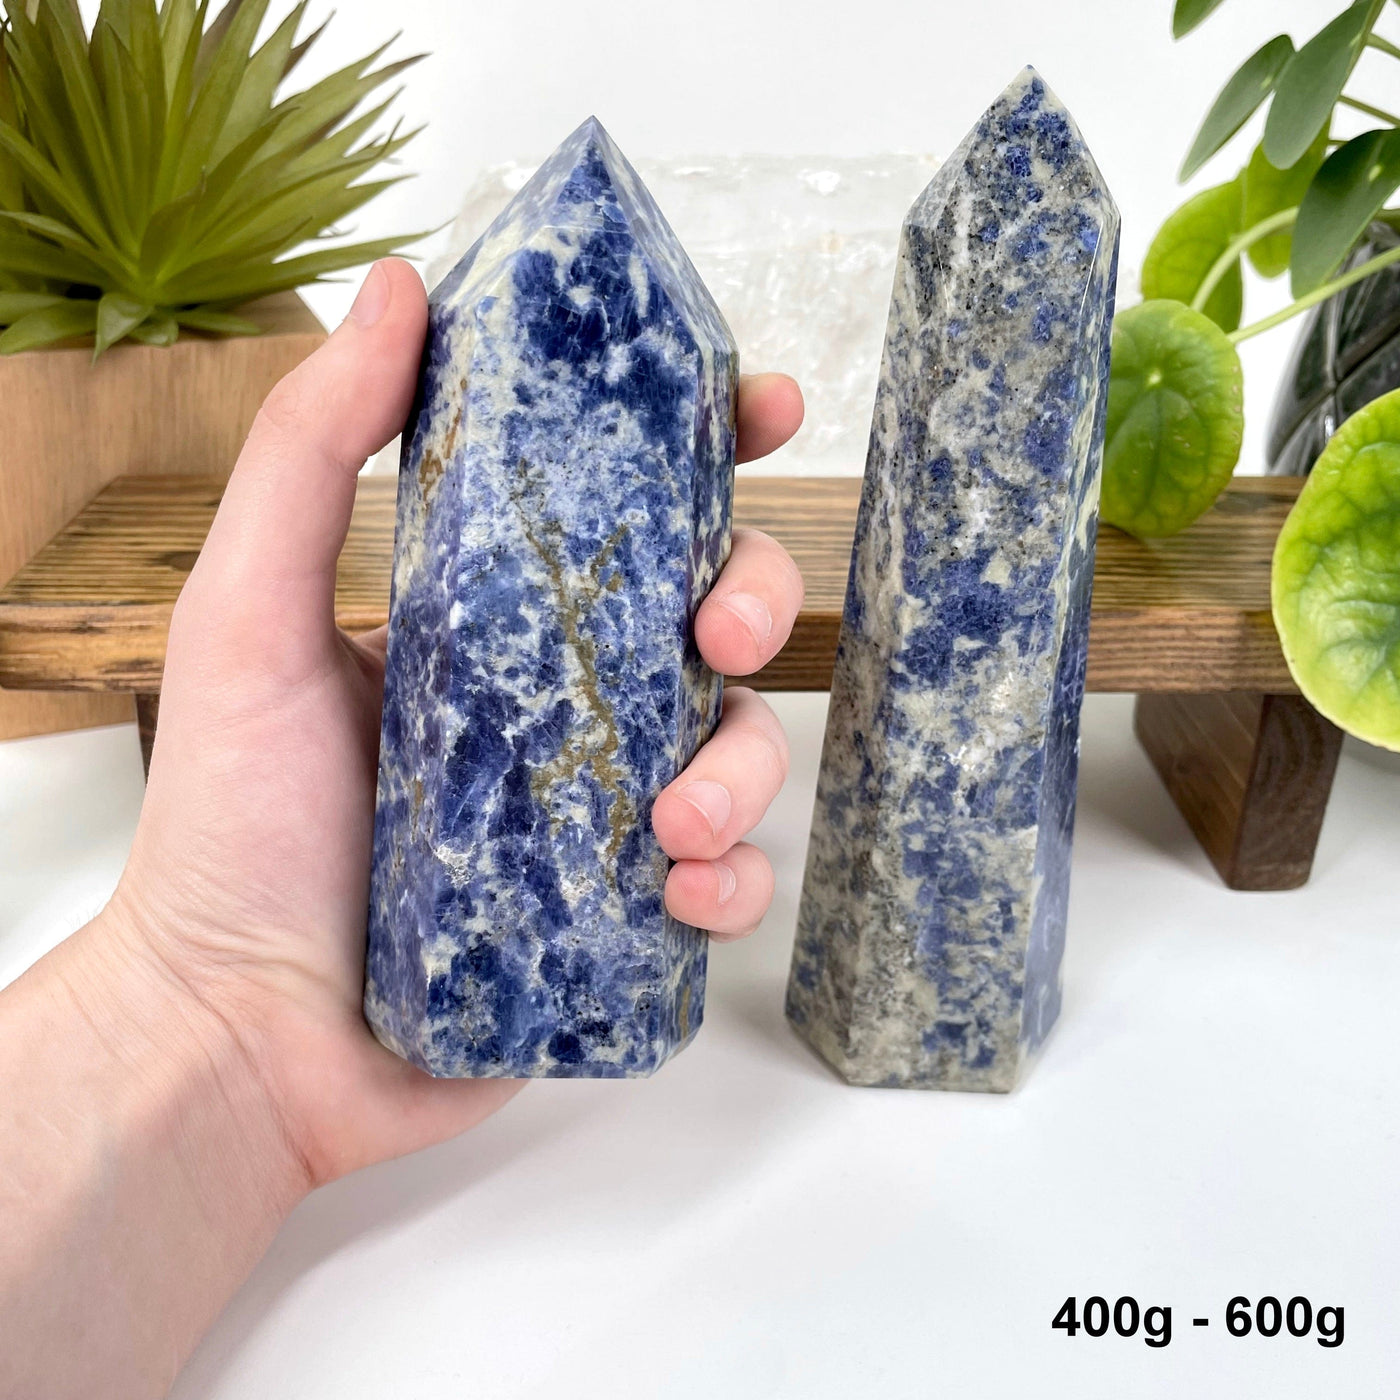 one 400g - 600g sodalite polished point in hand for size reference with one other on display for possible variations